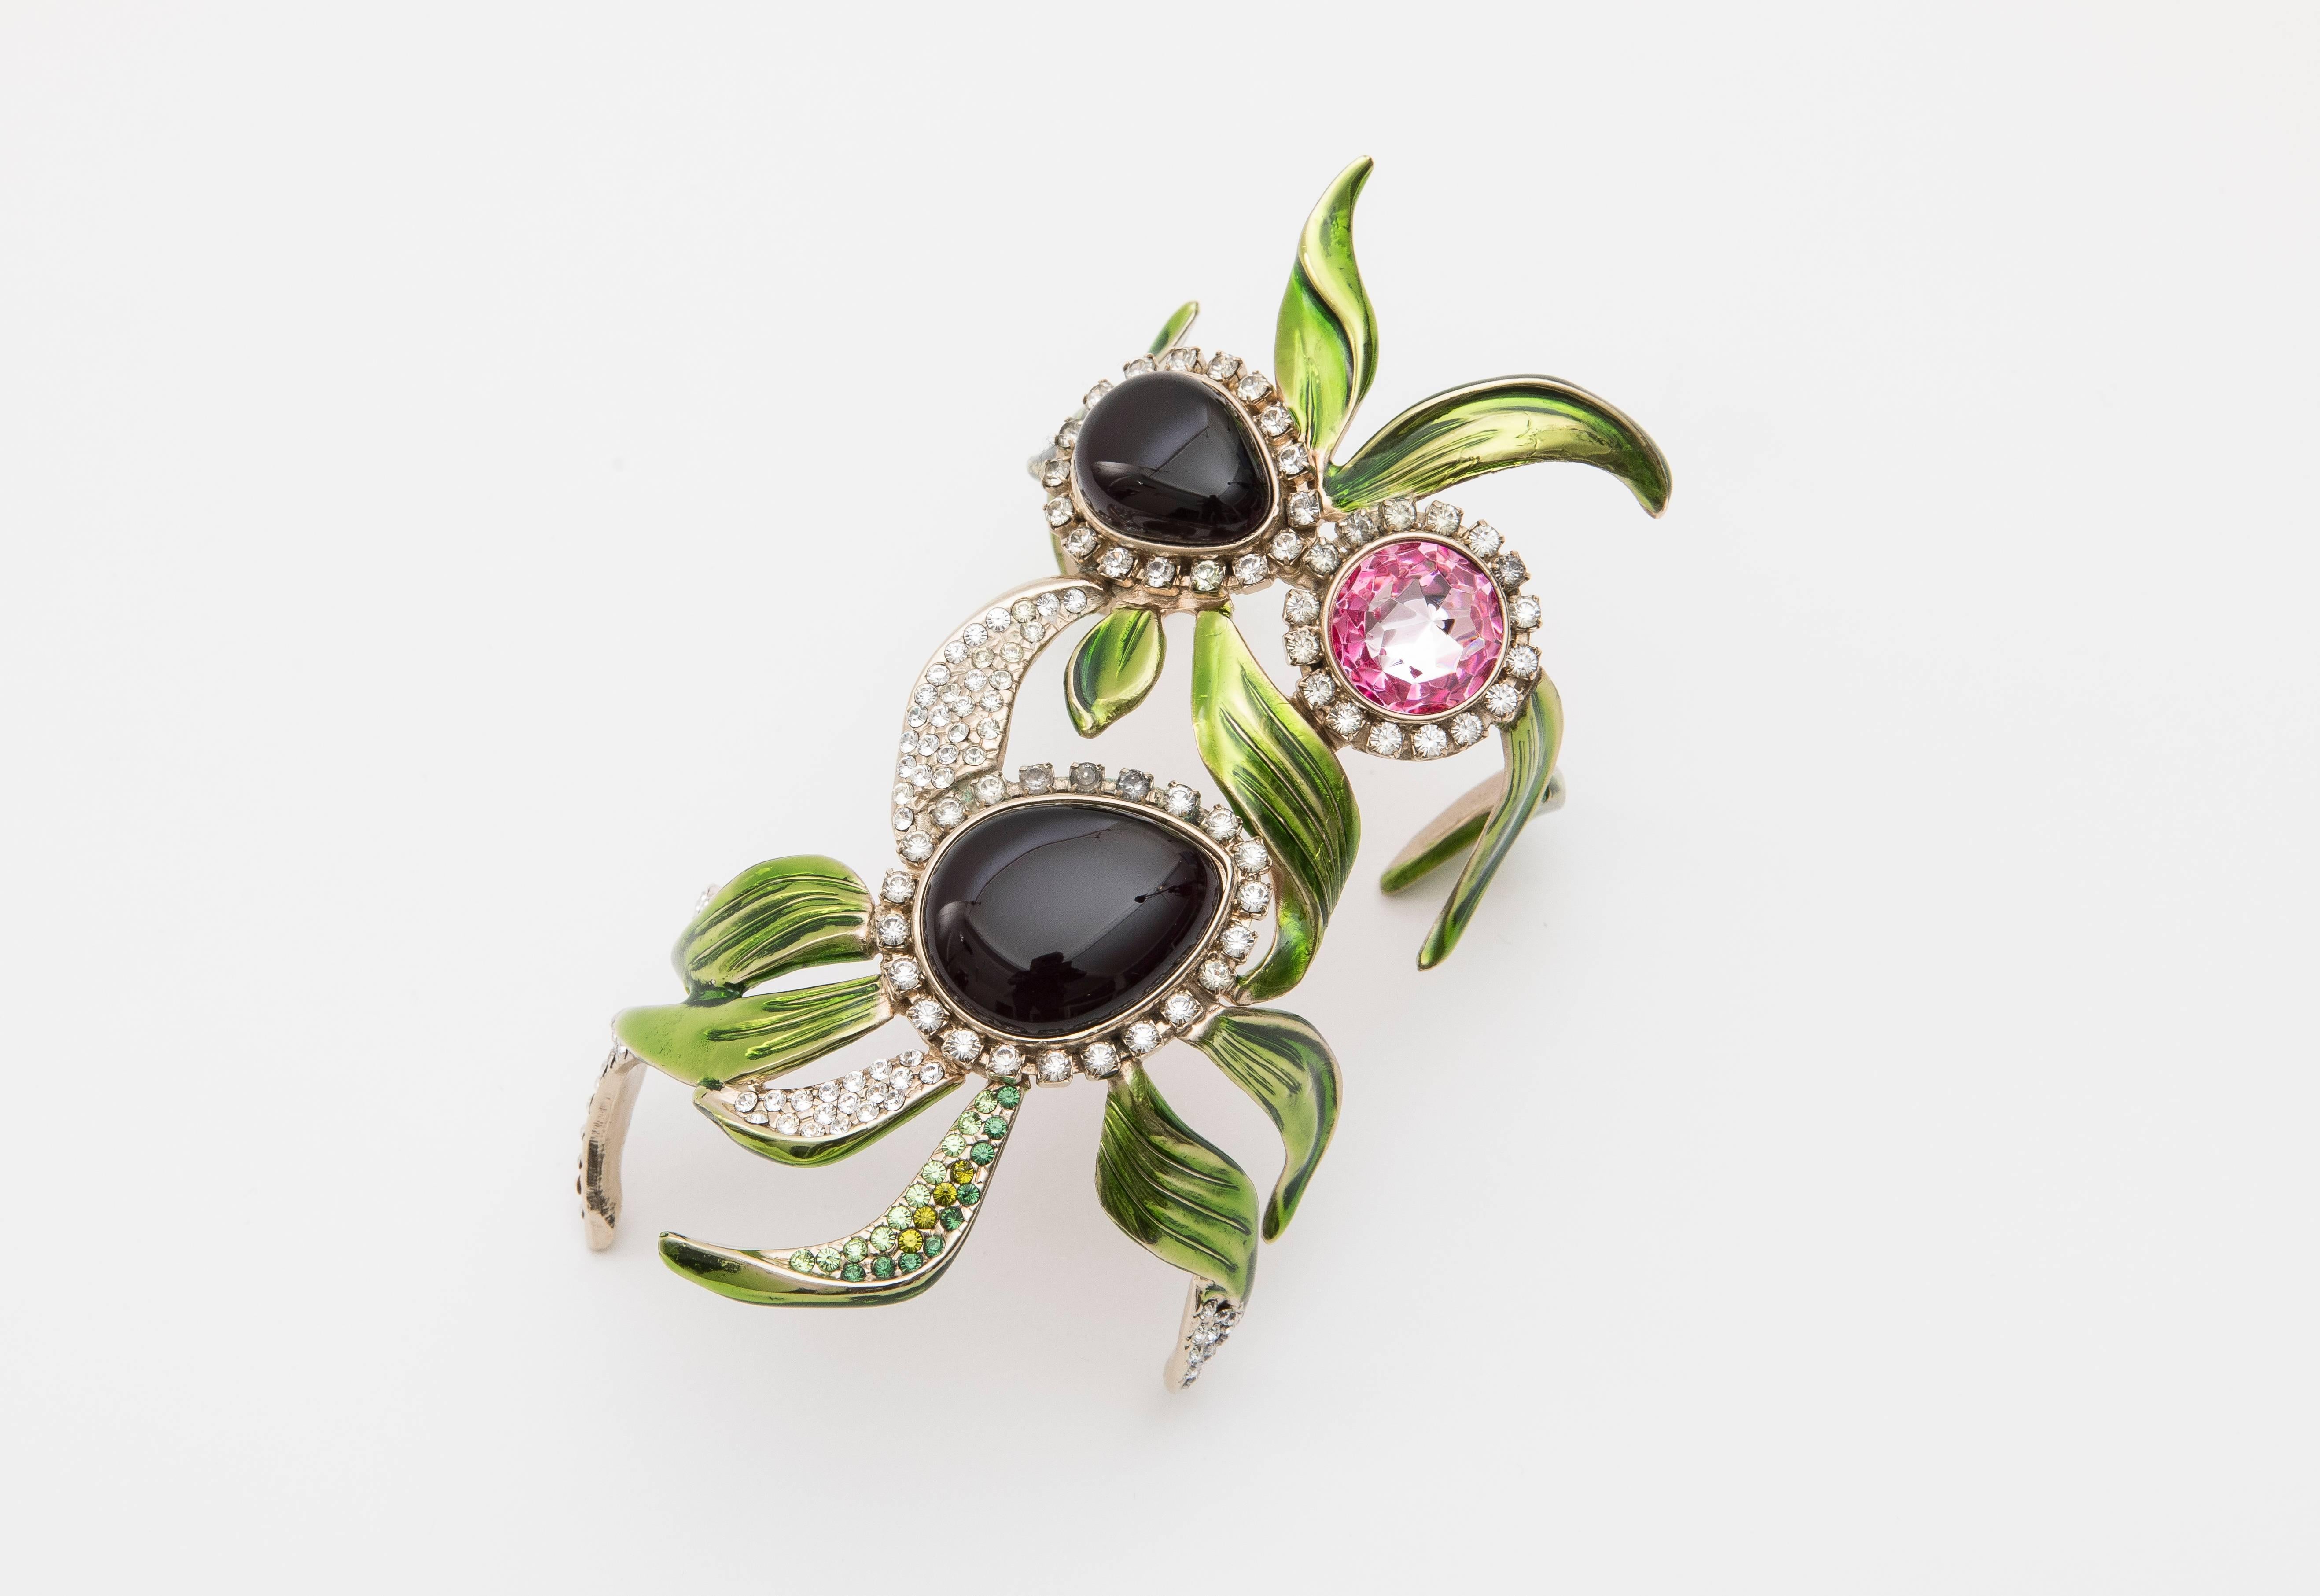 Tom Ford for Yves Saint Laurent Rive Gauche, Spring-Summer 2004 cuff bracelet with glass cabochons, sculpted enamel leaf detailing and diamanté embellishments. Includes designer box.

Fits a wrist size of 5.50 or smaller.

Inside Circumference 6,